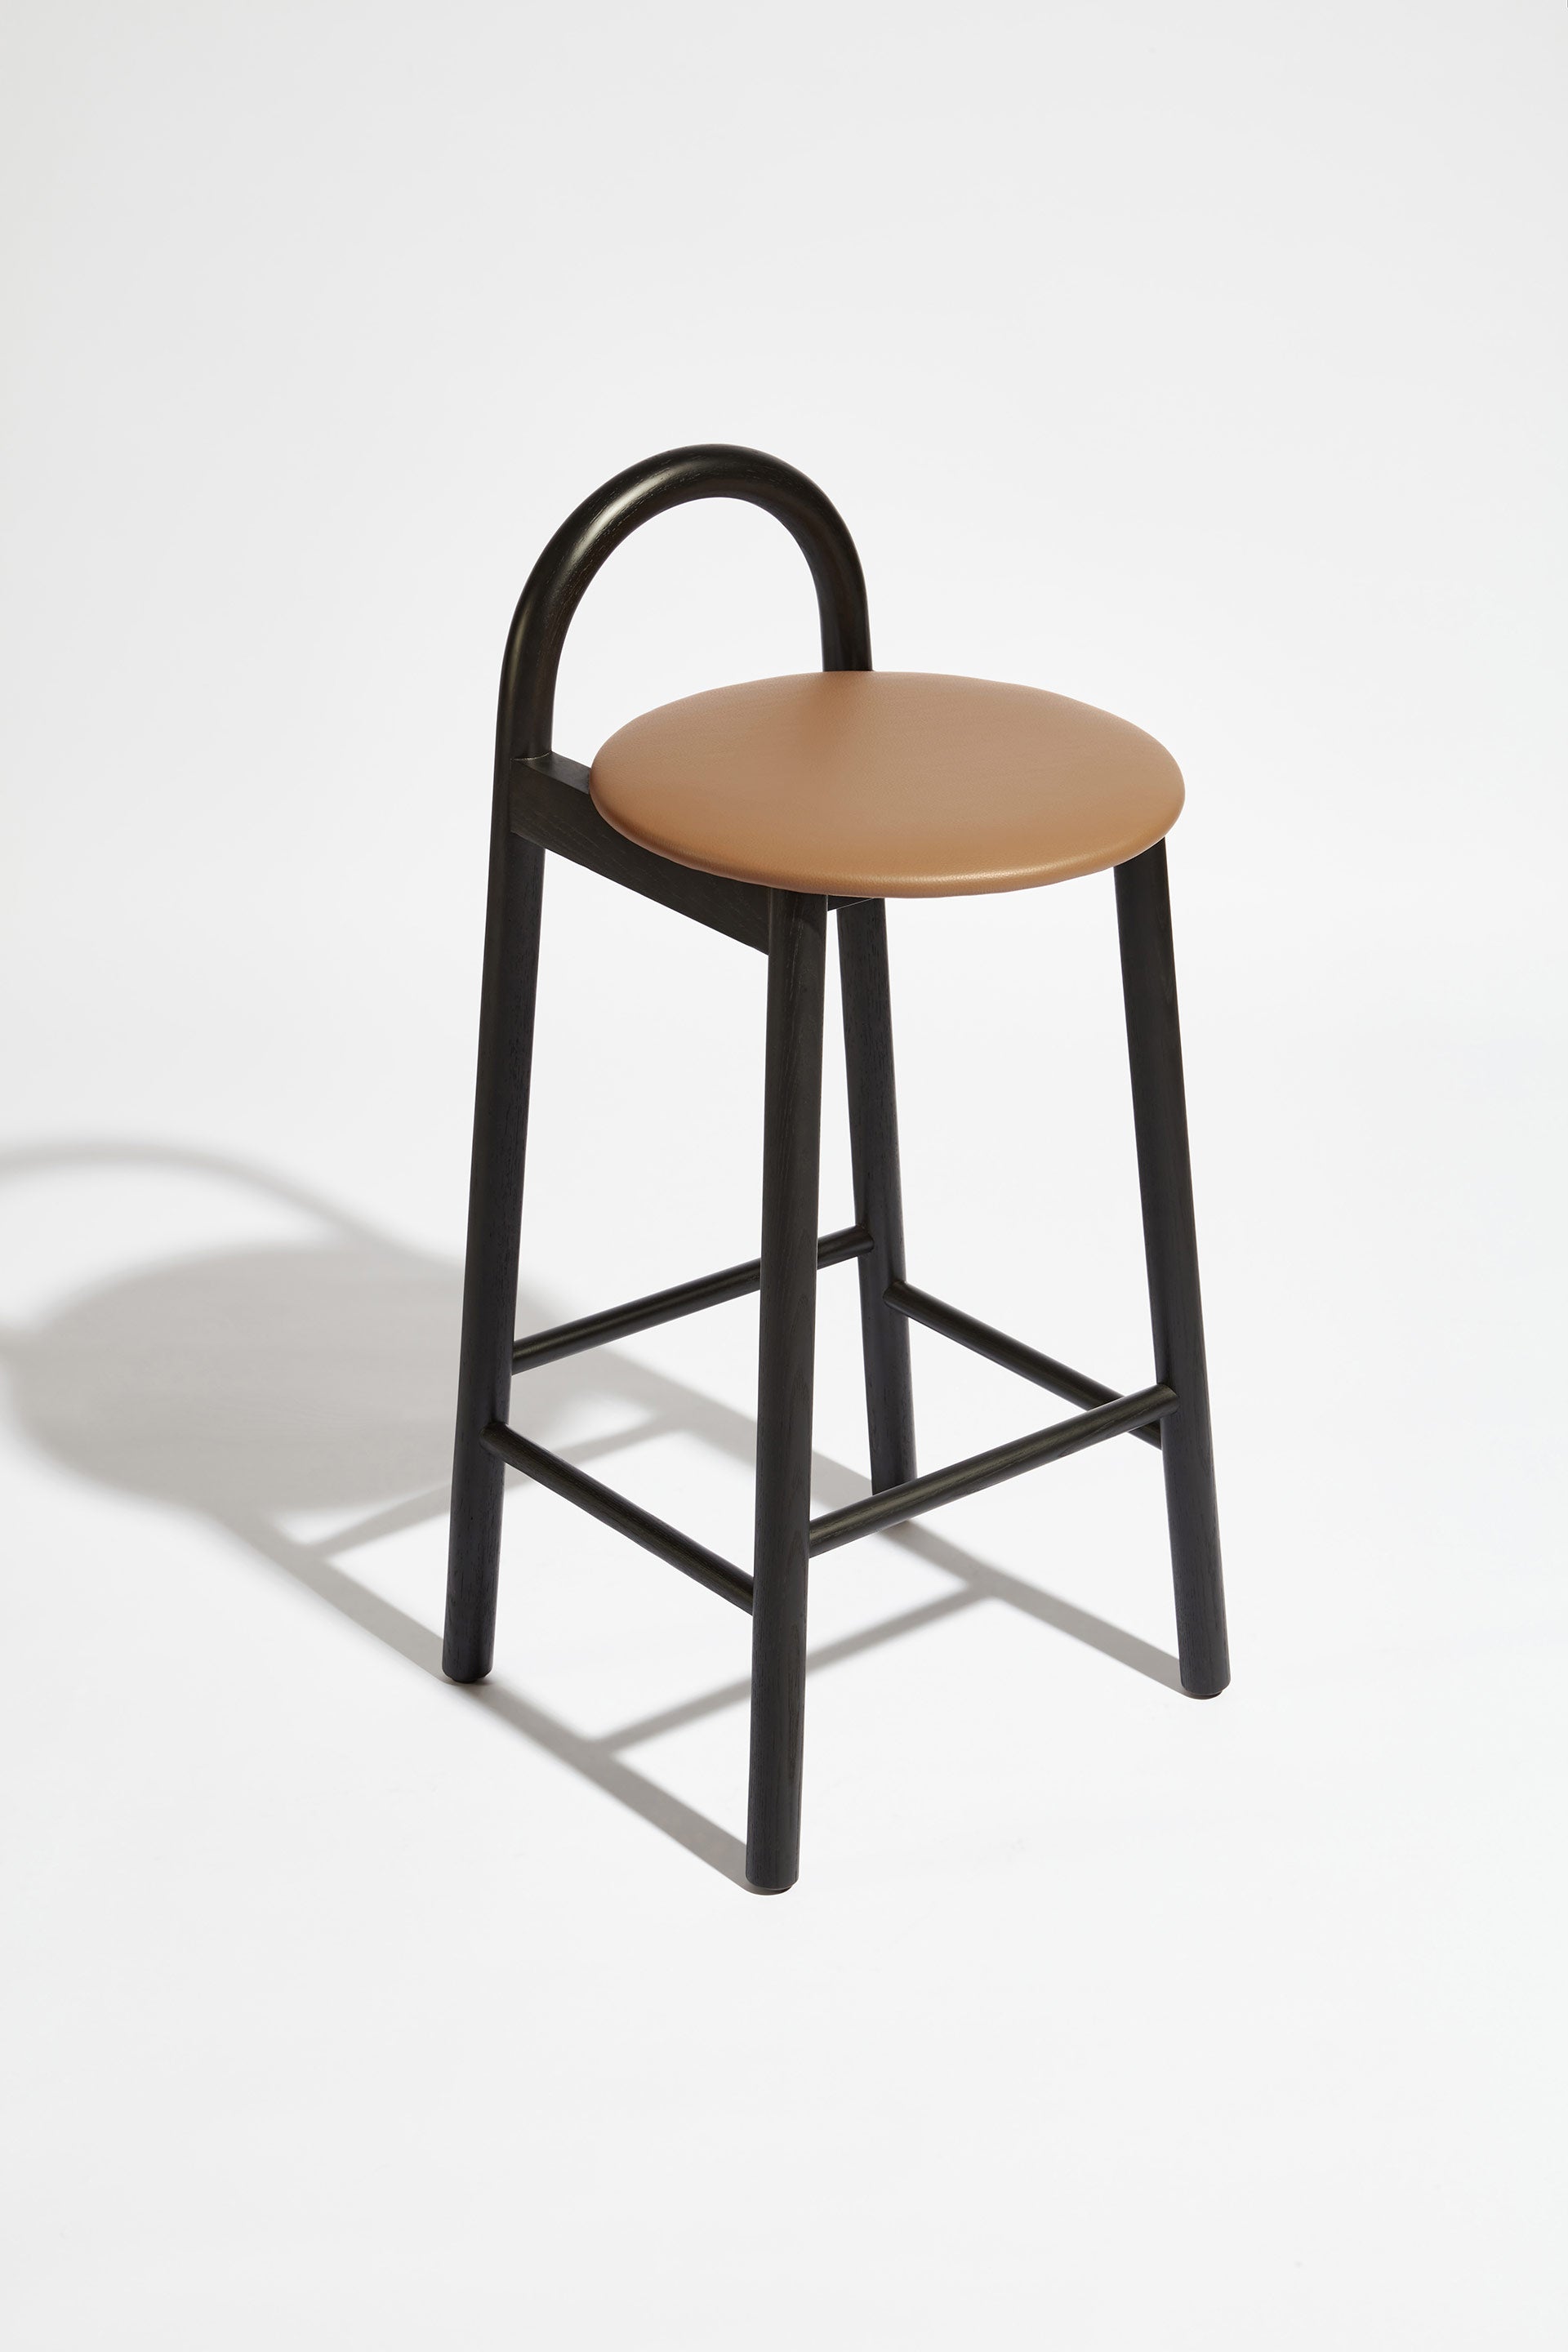 Bobby Timber Bar Counter Stool with leather seat pad | DesignByThem ** HF2 Lariat - 001 Camel or HL1 Primary - Saddle / Black Stained